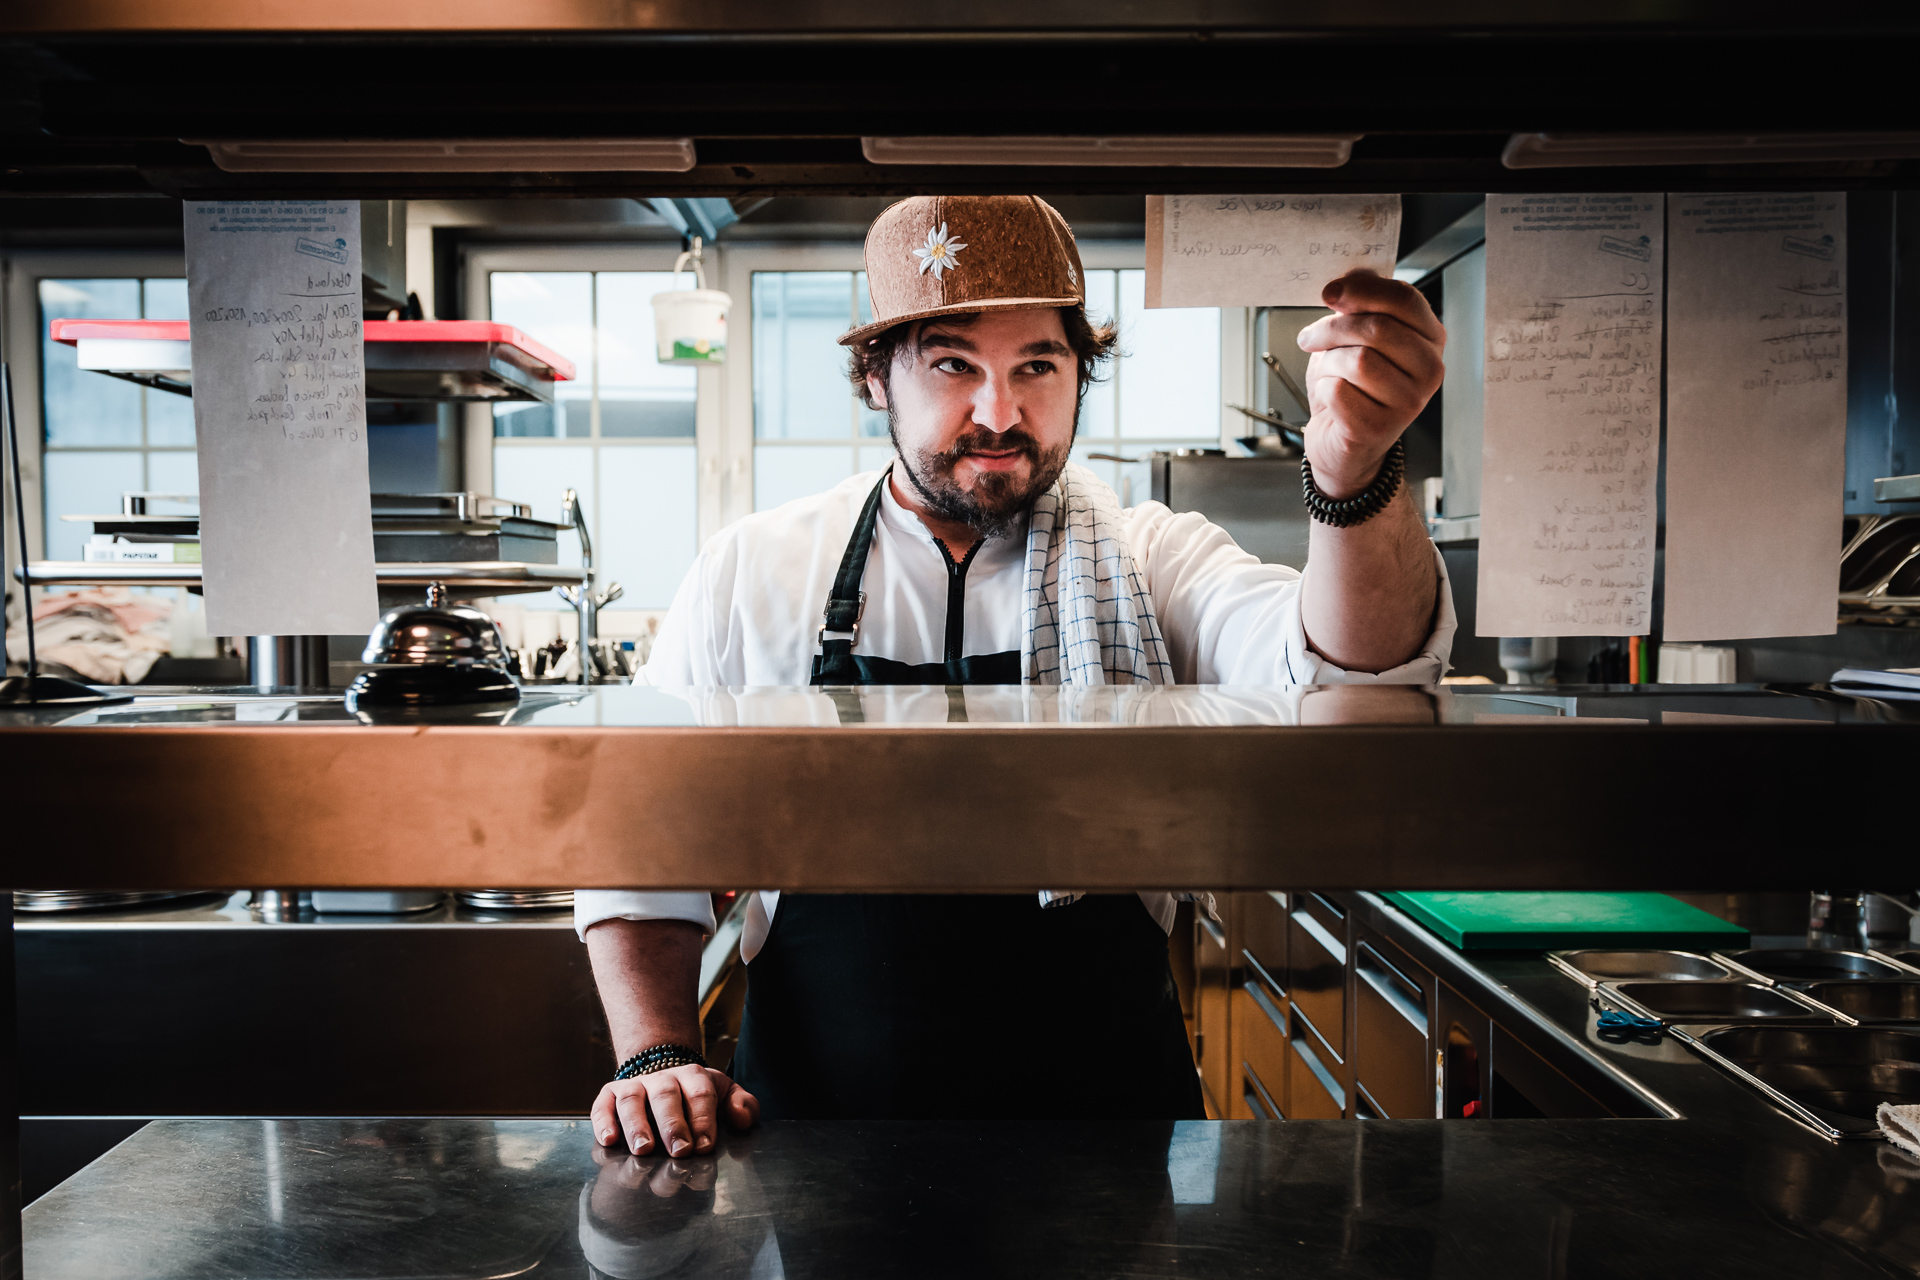 Portrait photo of a chef taking an order in the kitchen.